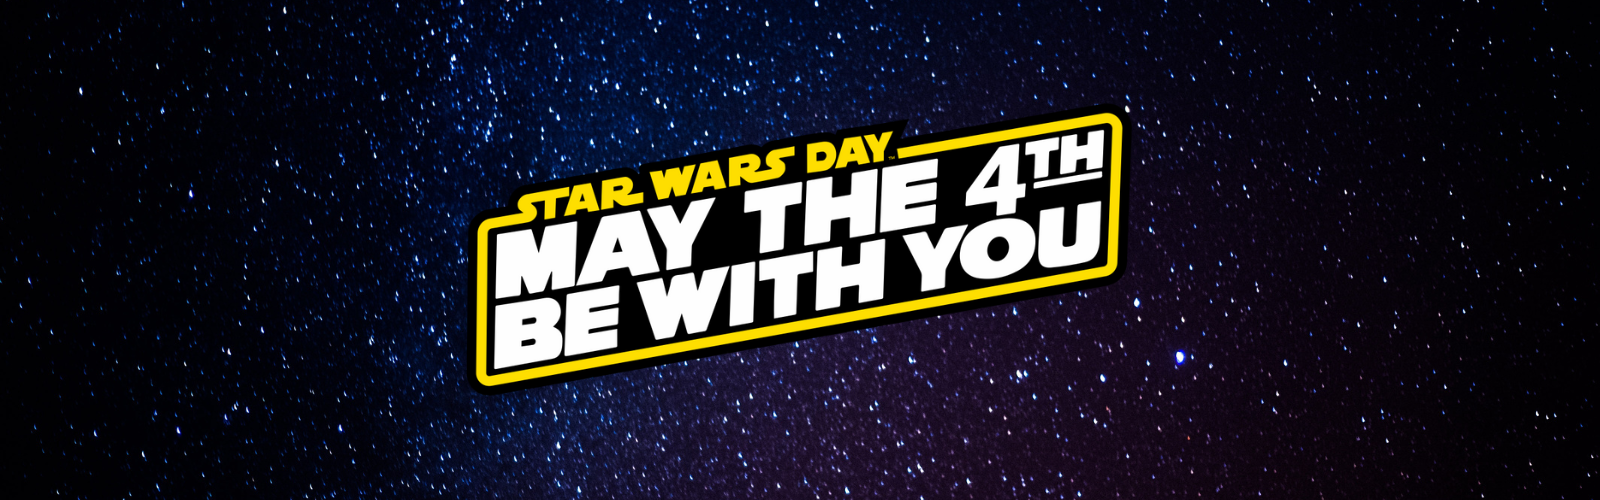 Star Wars Day - May The 4th Be With You